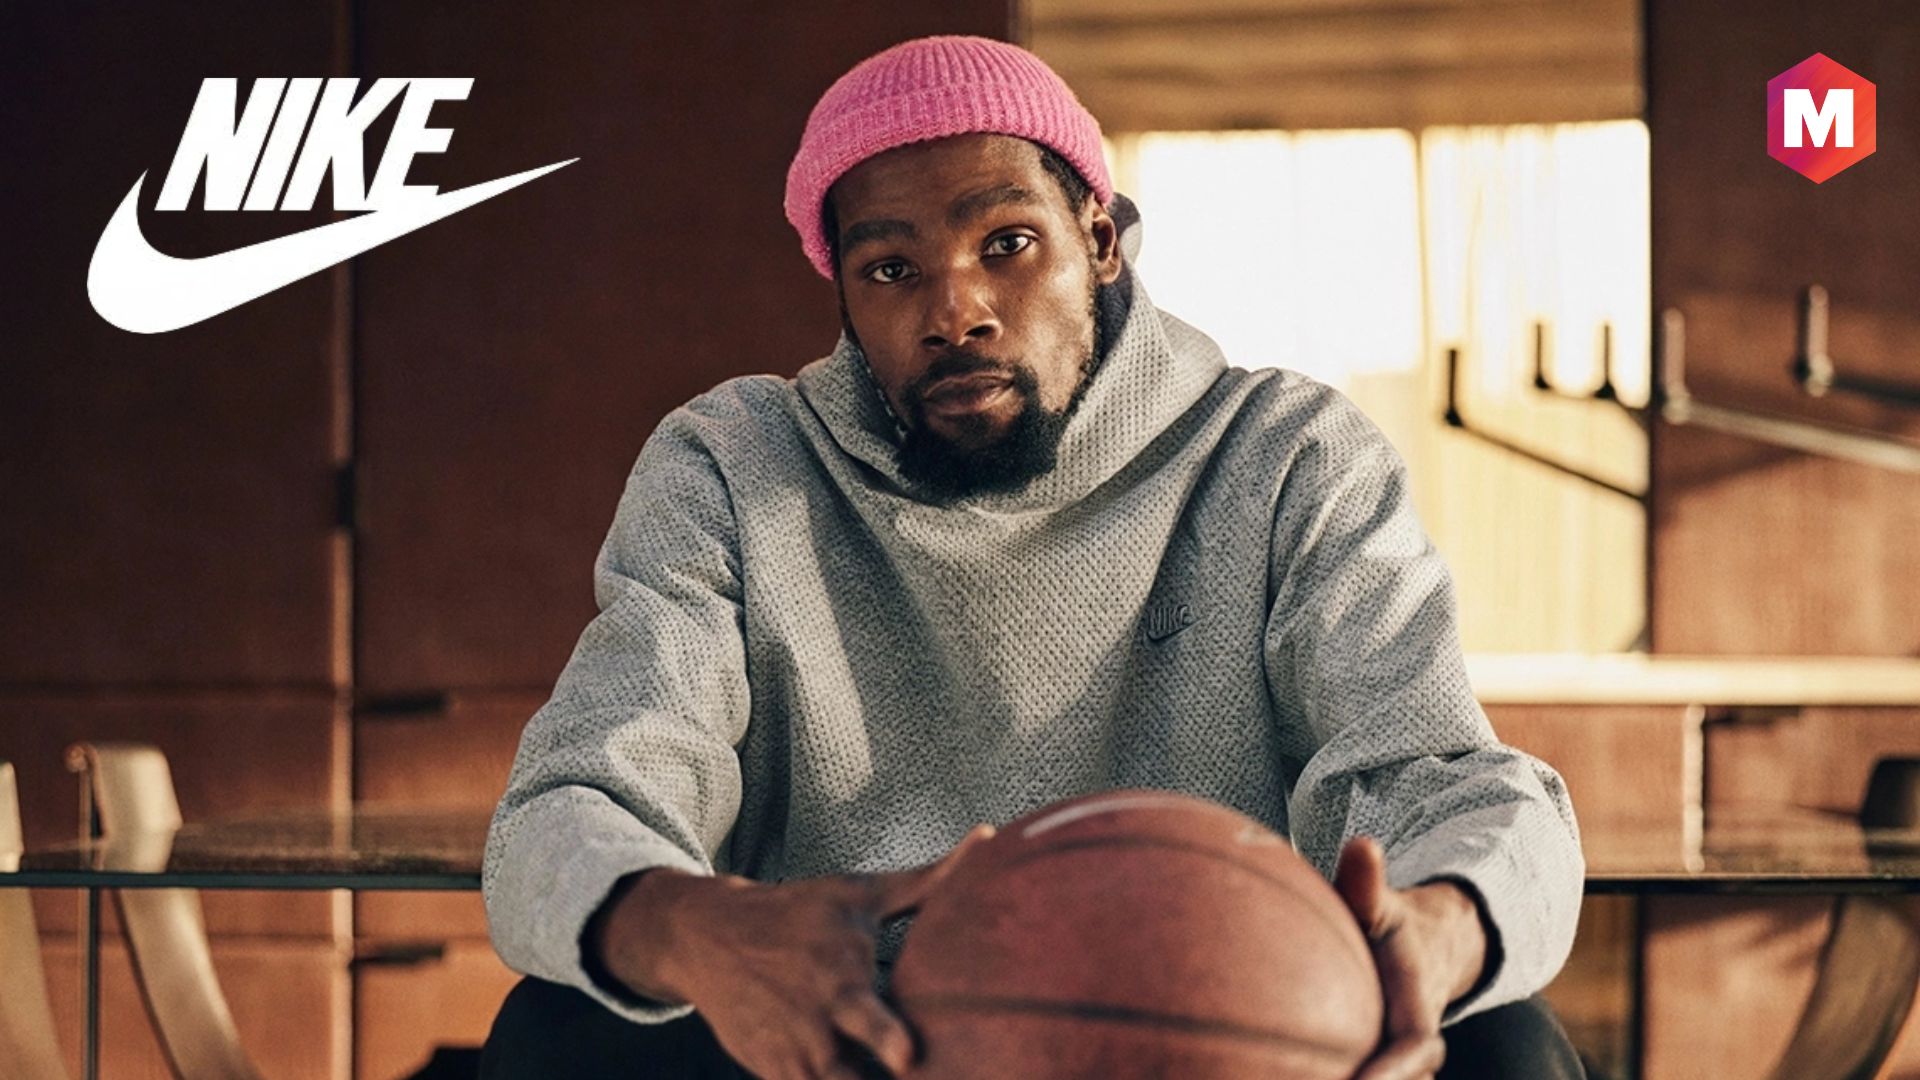 Kevin Durant inks lifetime deal with Nike, 3rd NBA player after